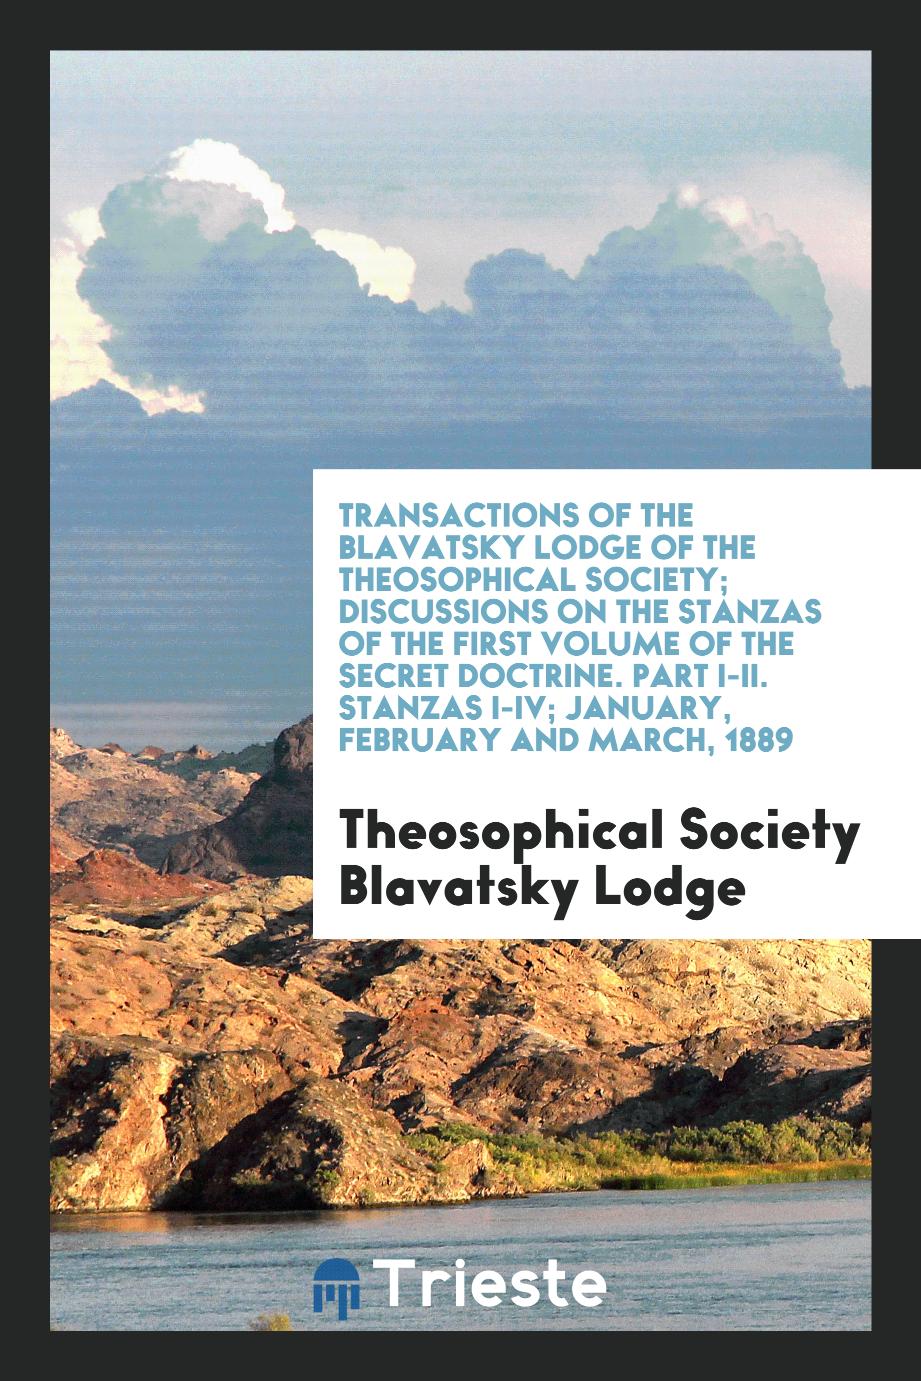 Transactions of the Blavatsky Lodge of the Theosophical Society; Discussions on the Stanzas of the First Volume of the Secret Doctrine. Part I-II. Stanzas I-IV; January, February and March, 1889